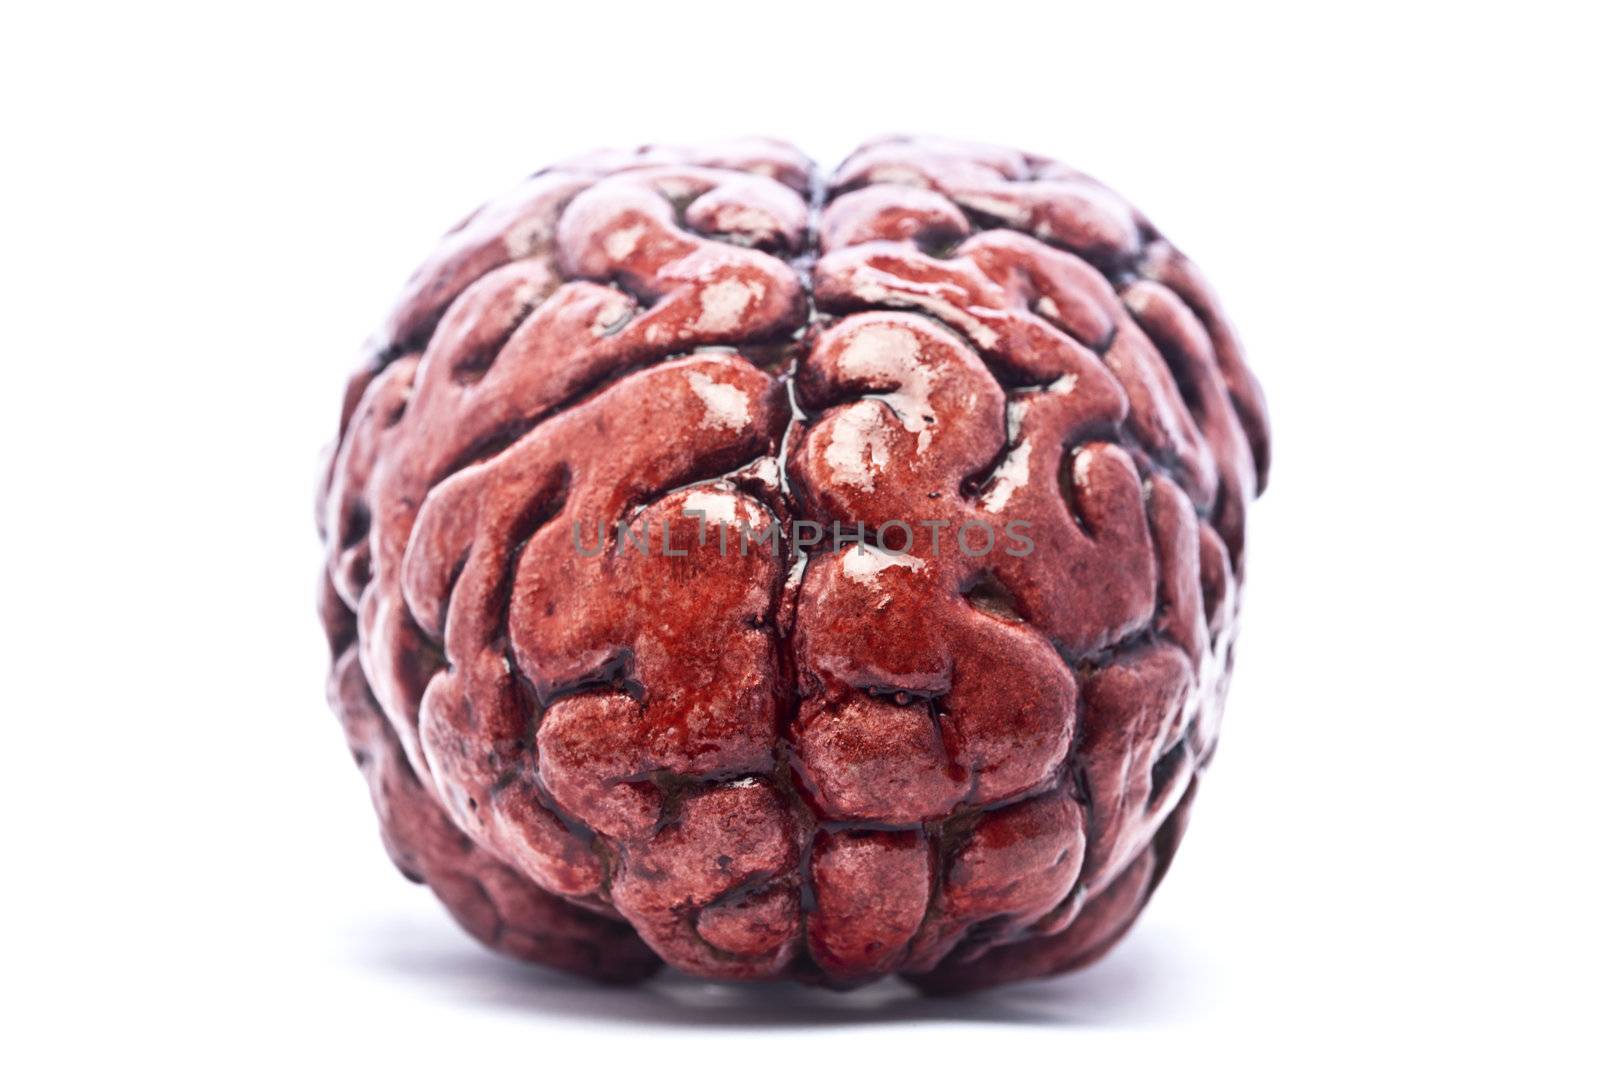 A bloody brain, on a white background. Check out the other images in this series.